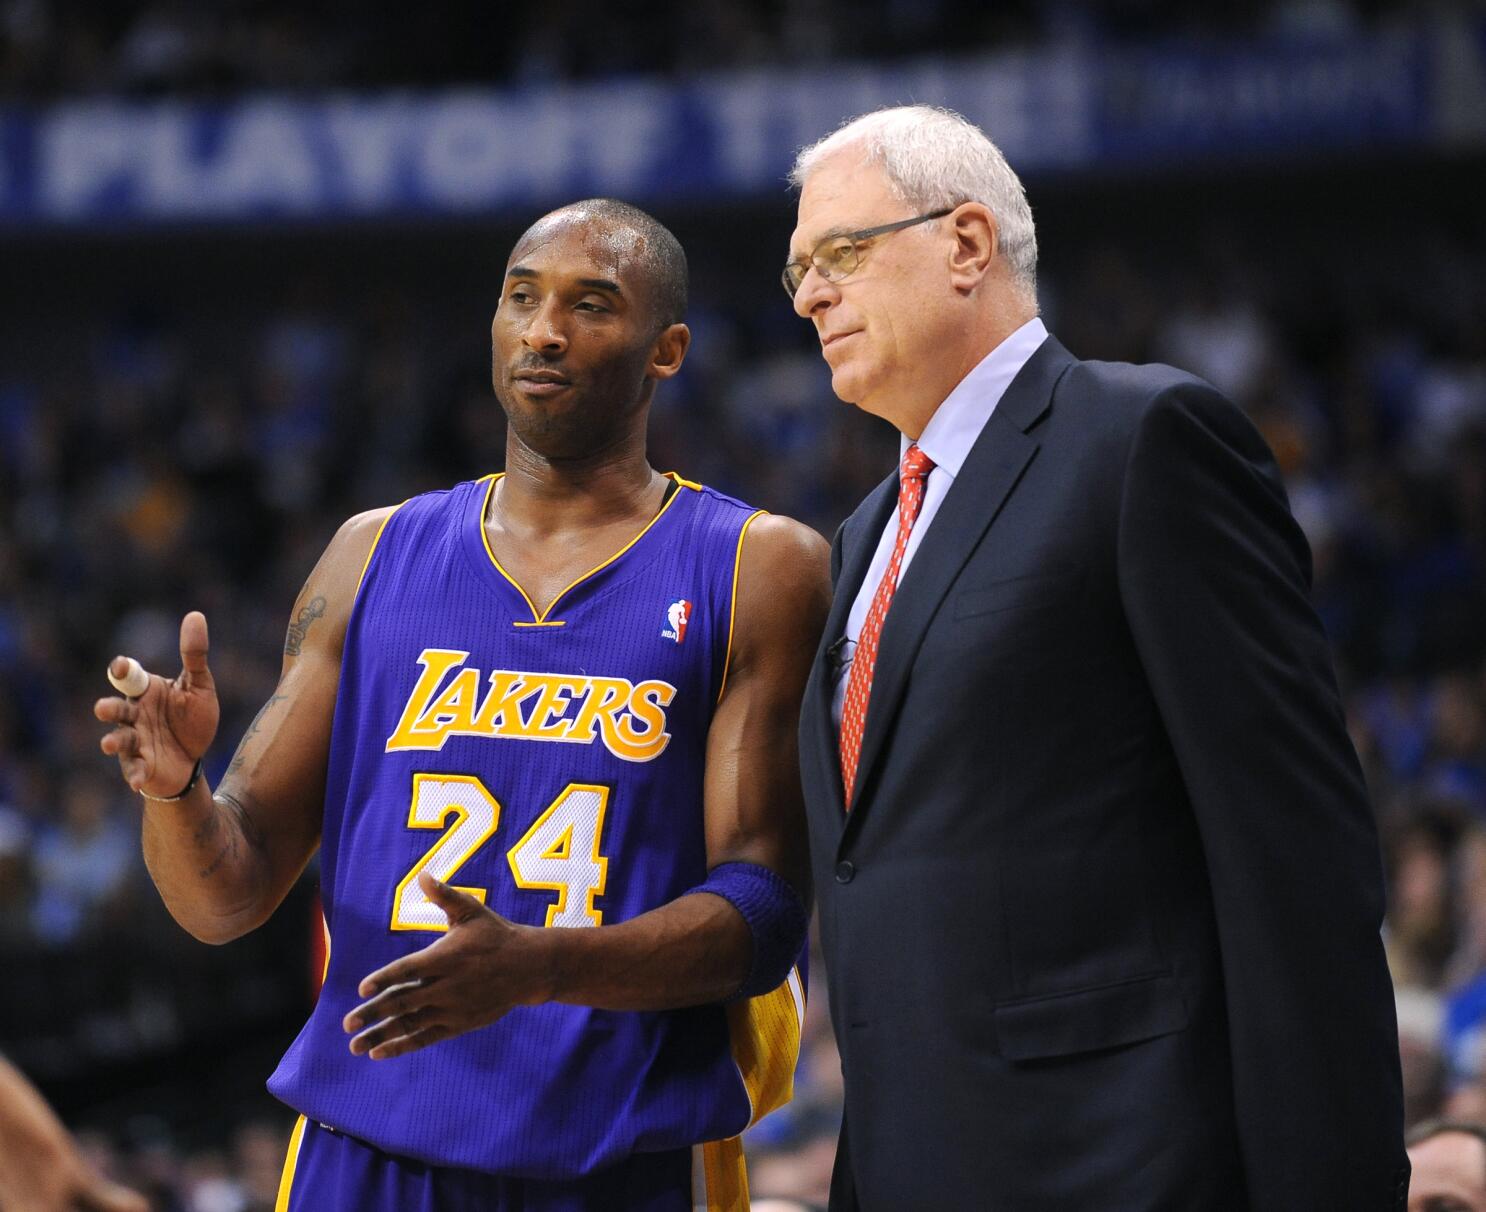 How Kobe Bryant played a role in Dallas Mavericks' 2011 title